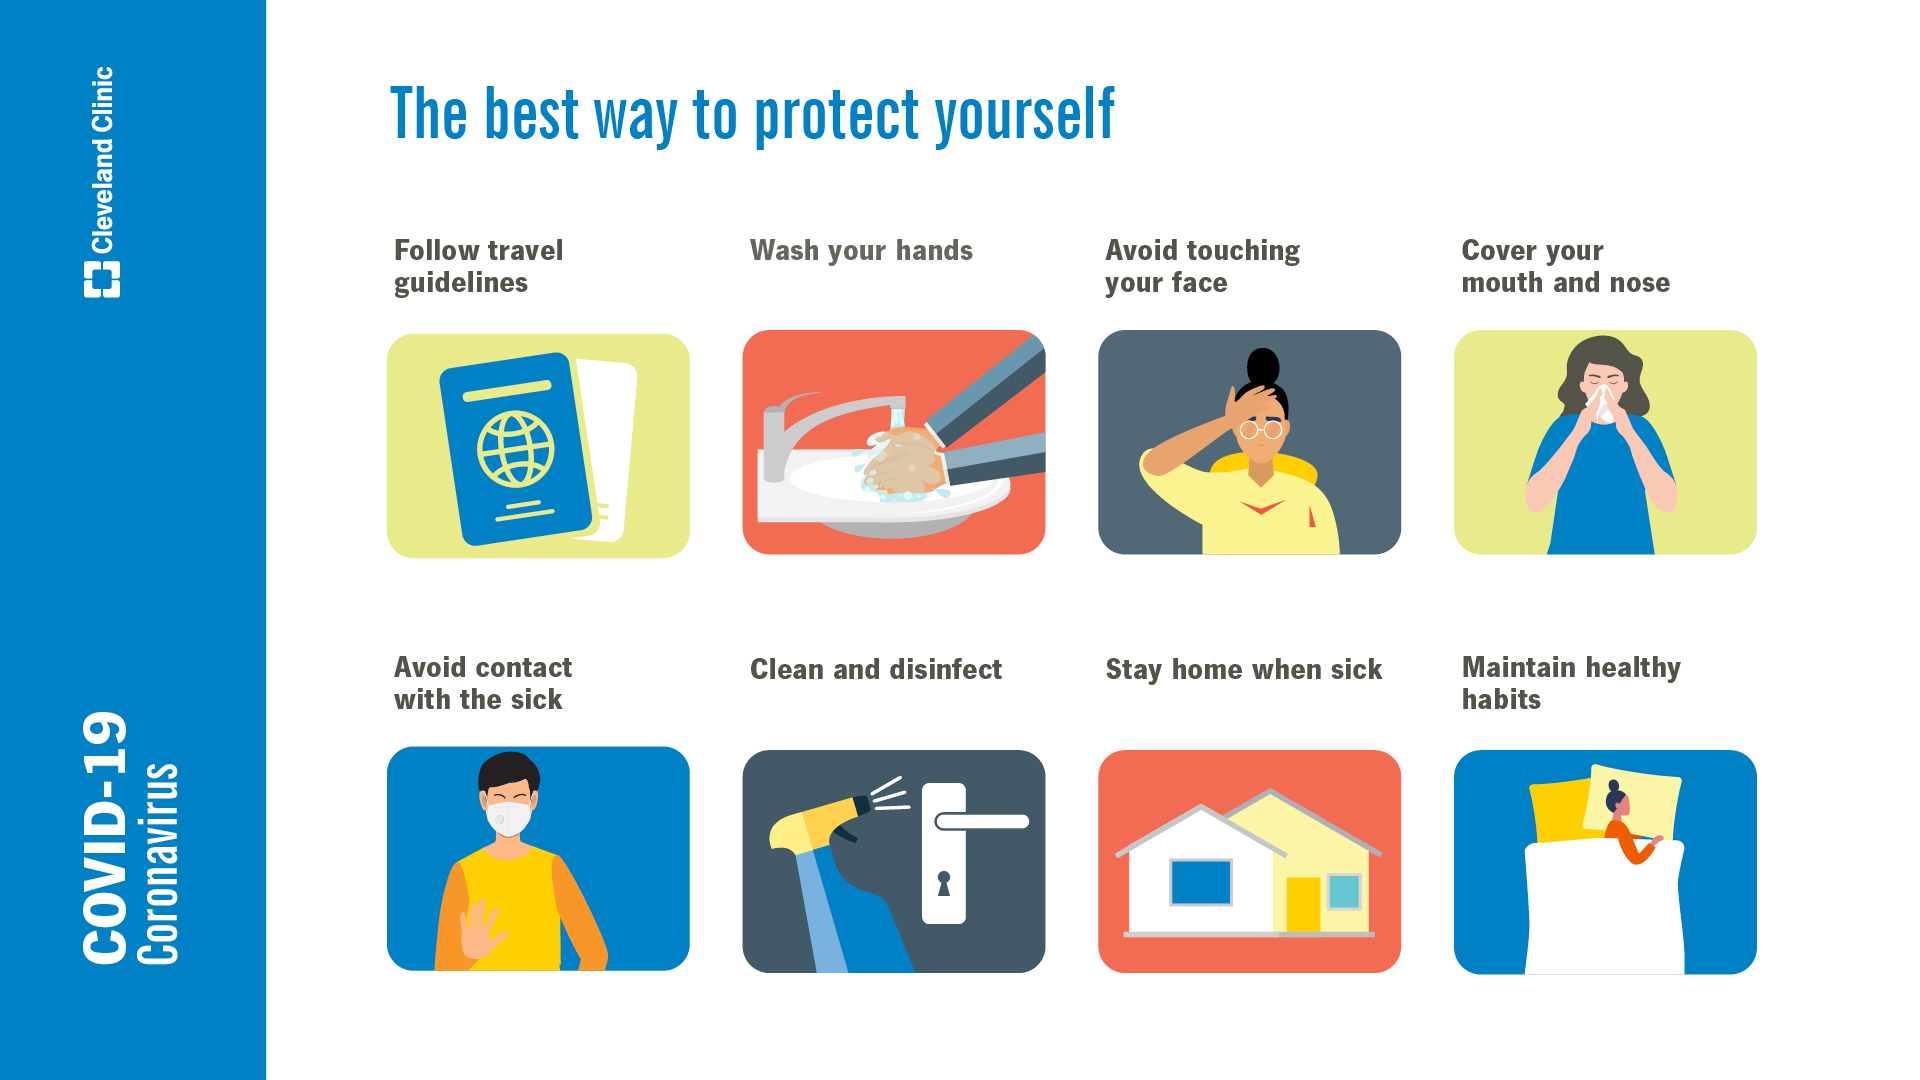 The best ways to protect yourself from COVID-19. 